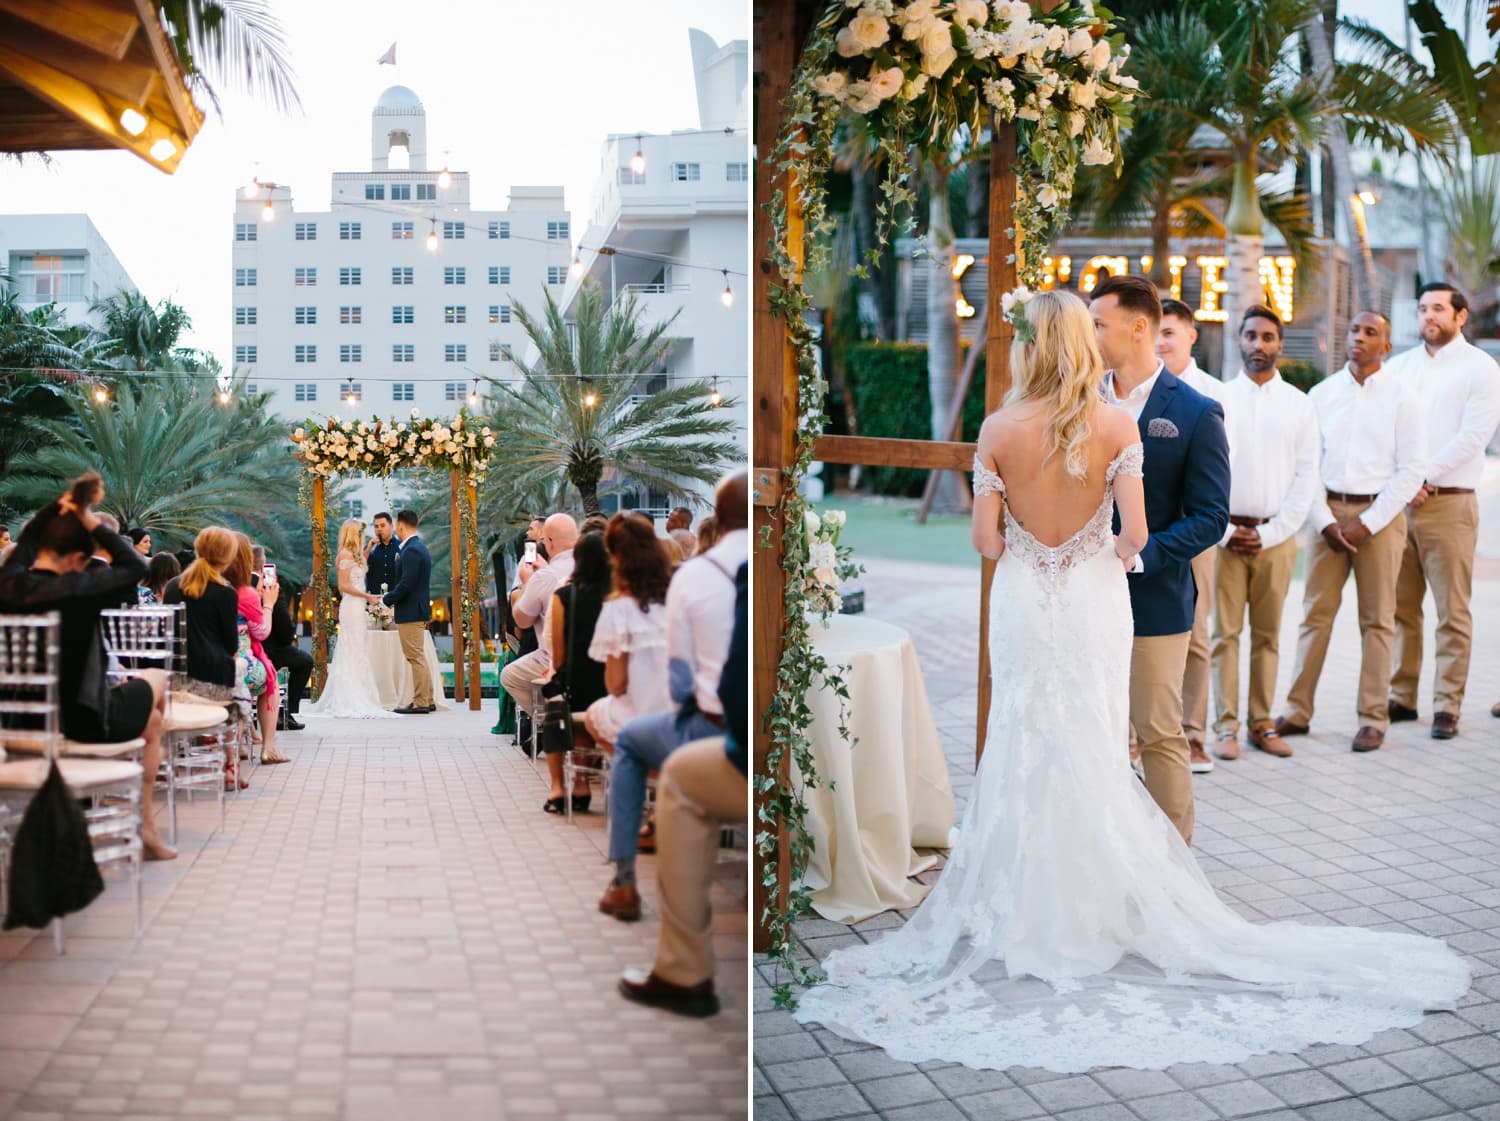 Wedding Ceremony At the National Hotel in South Beach. Winter Beach wedding